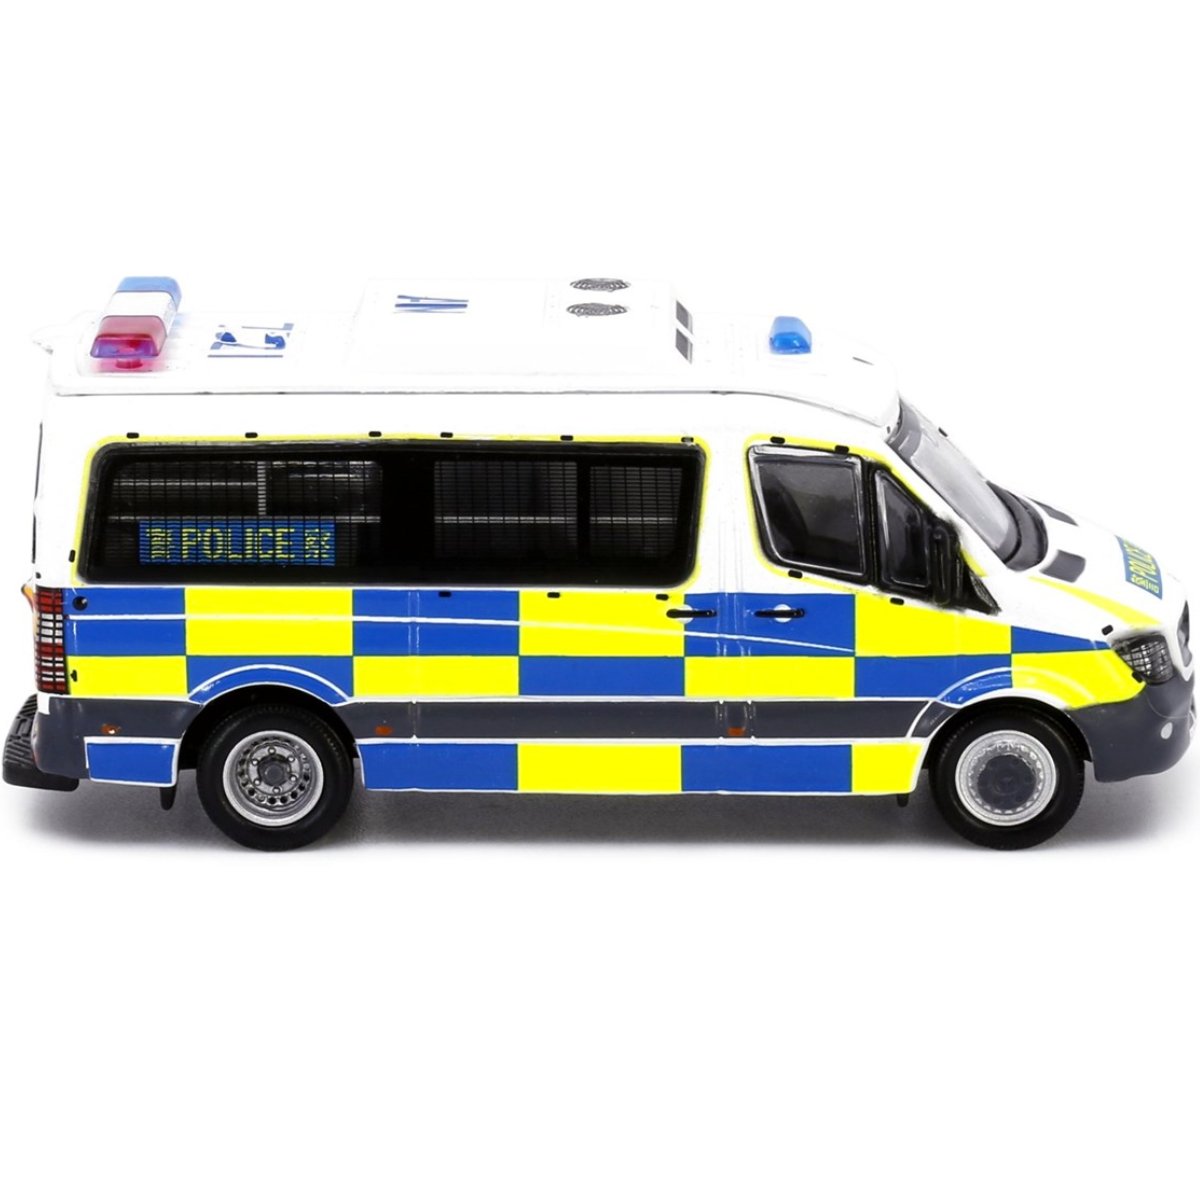 Tiny Models Mercedes Benz Sprinter Police Traffic AM7521 (1:76 Scale) - Phillips Hobbies